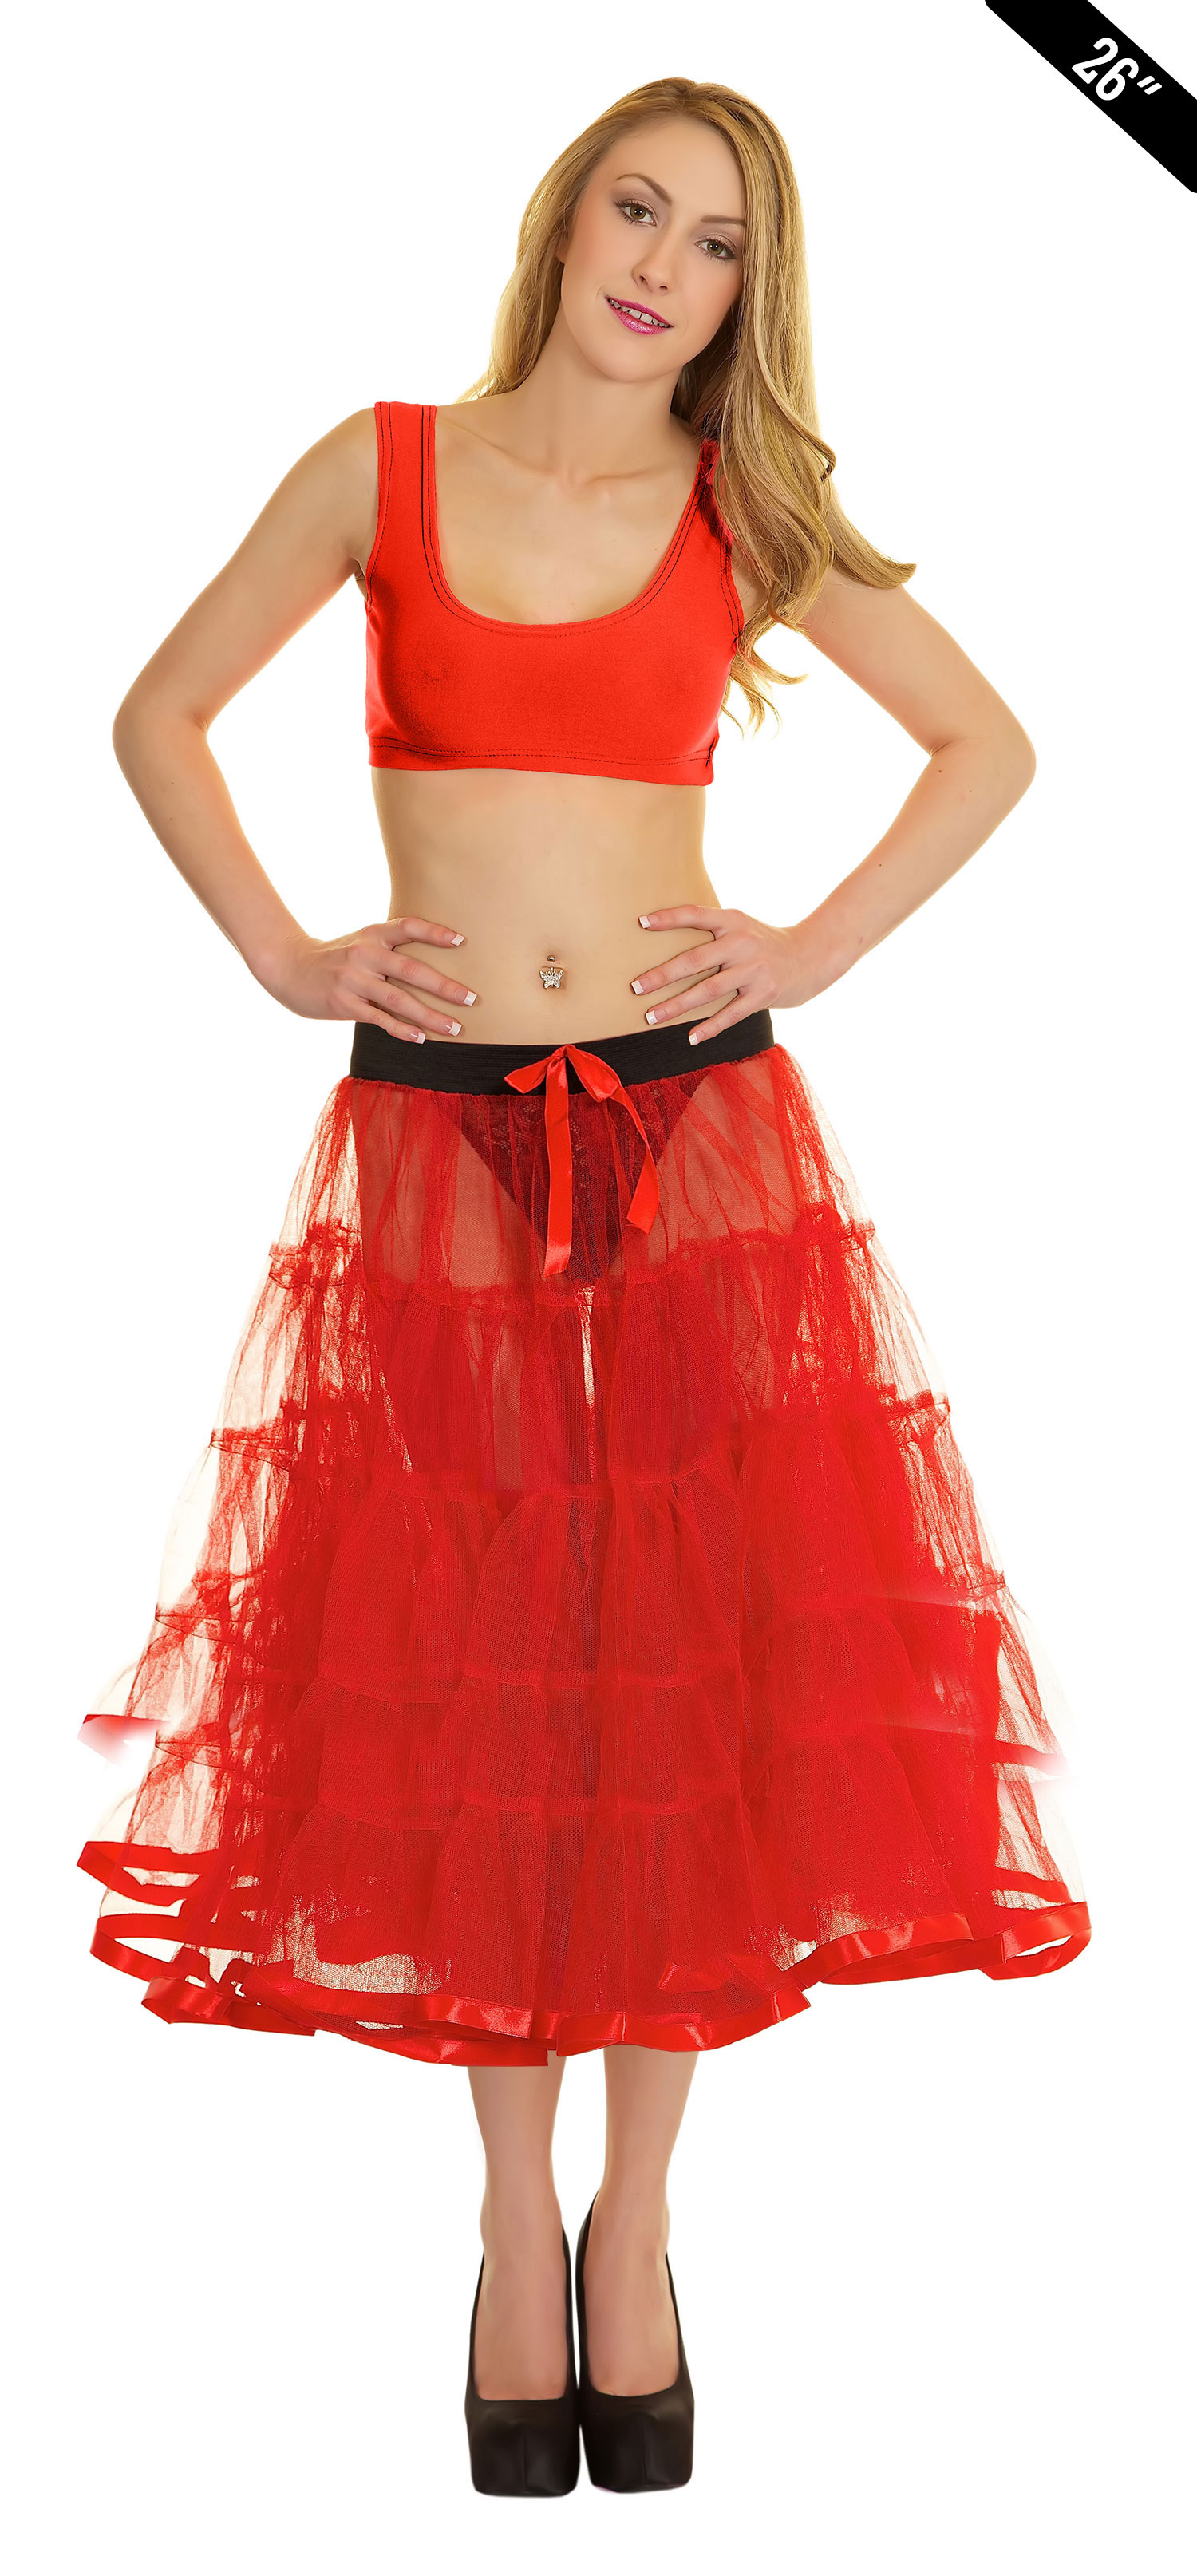 Crazy Chick Adult 5 Tier Petticoat with Ribbon Red Tutu Skirt (Approximately 26 Inches Long)